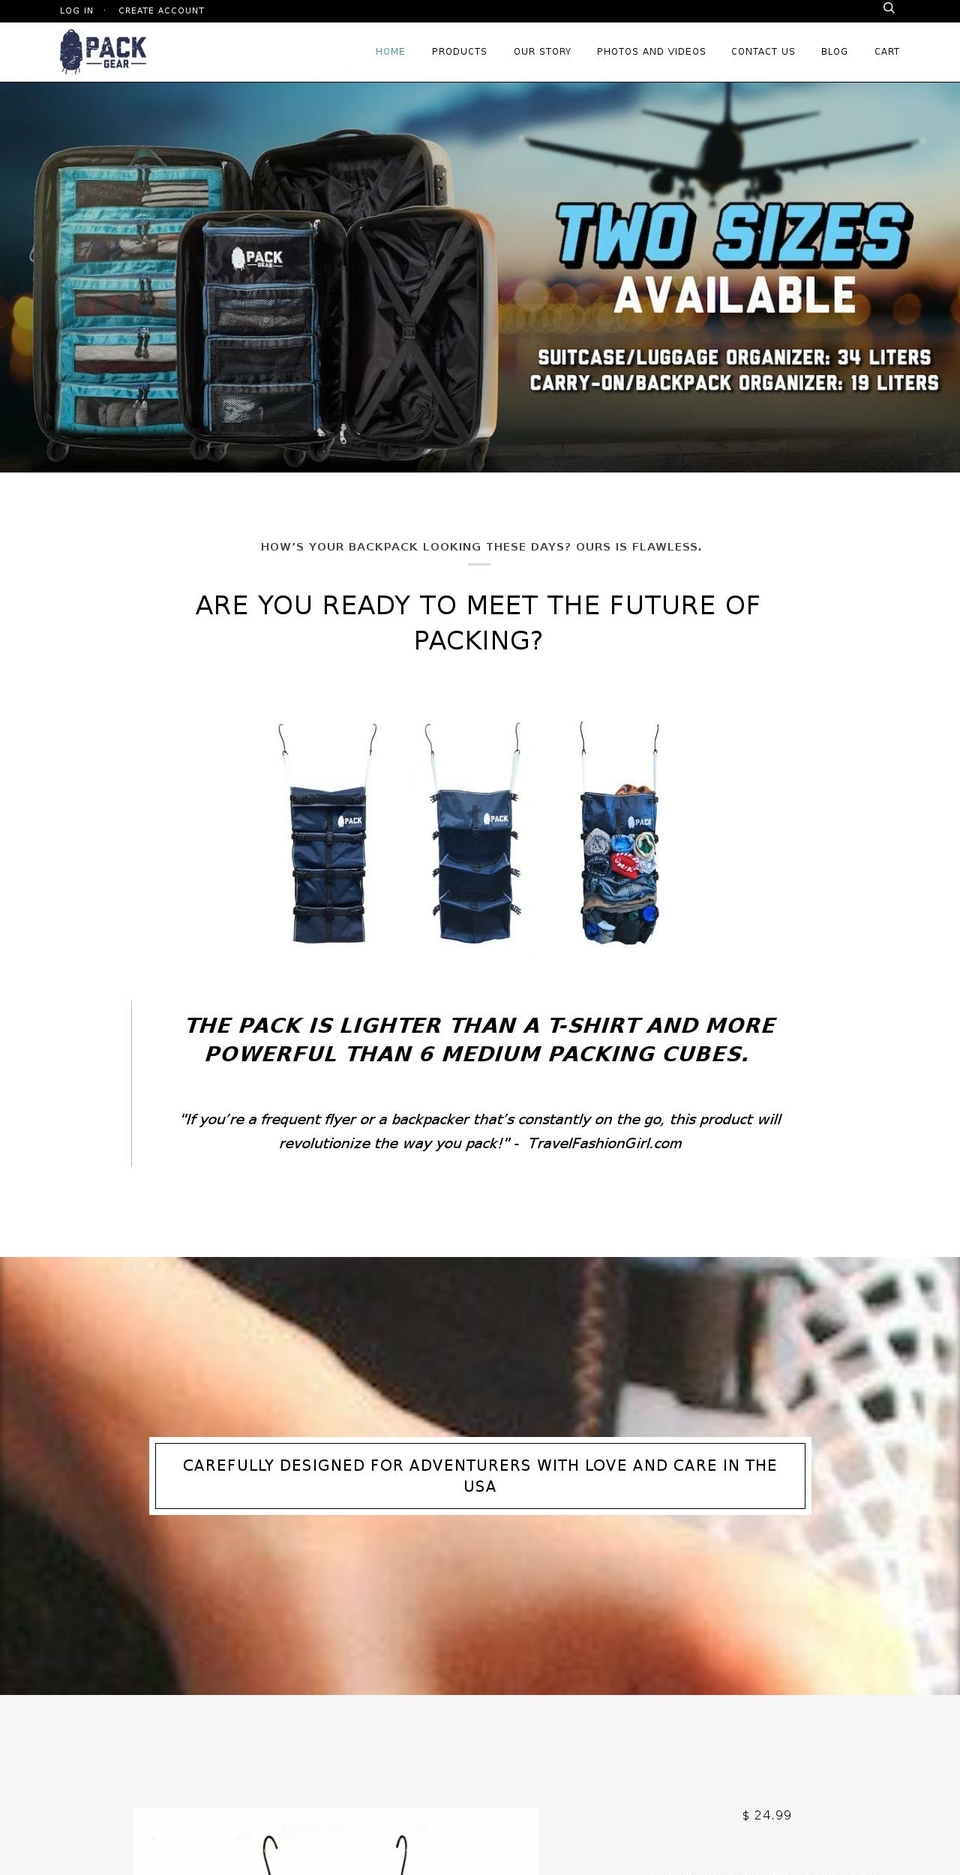 Copy of Pipeline Shopify theme site example thepackgear.com